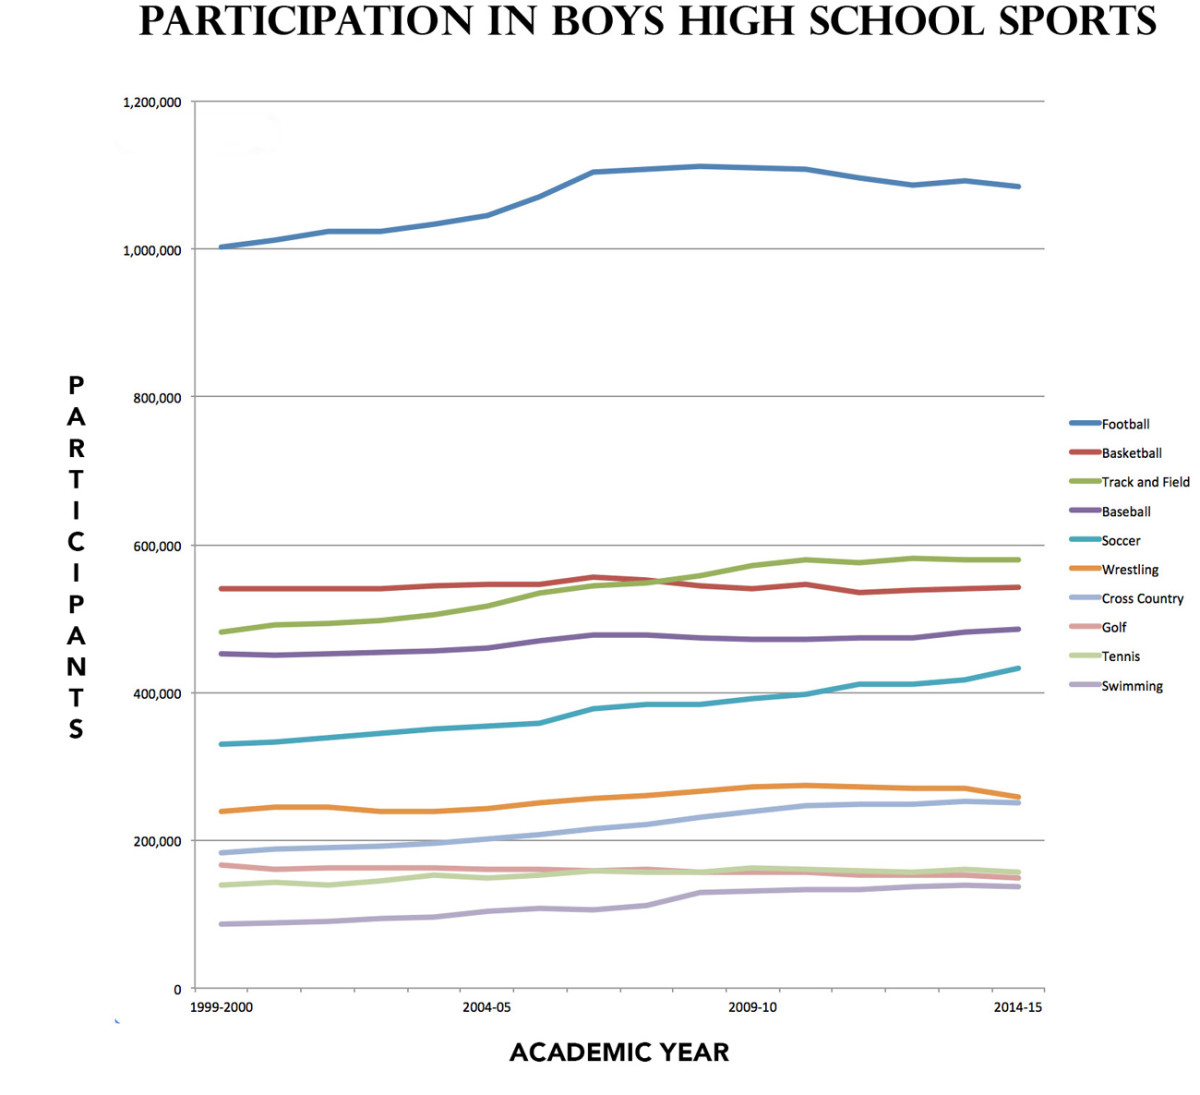 Football’s numbers are down, but it remains by far the most popular high school sport in the U.S. as measured by number of participants.